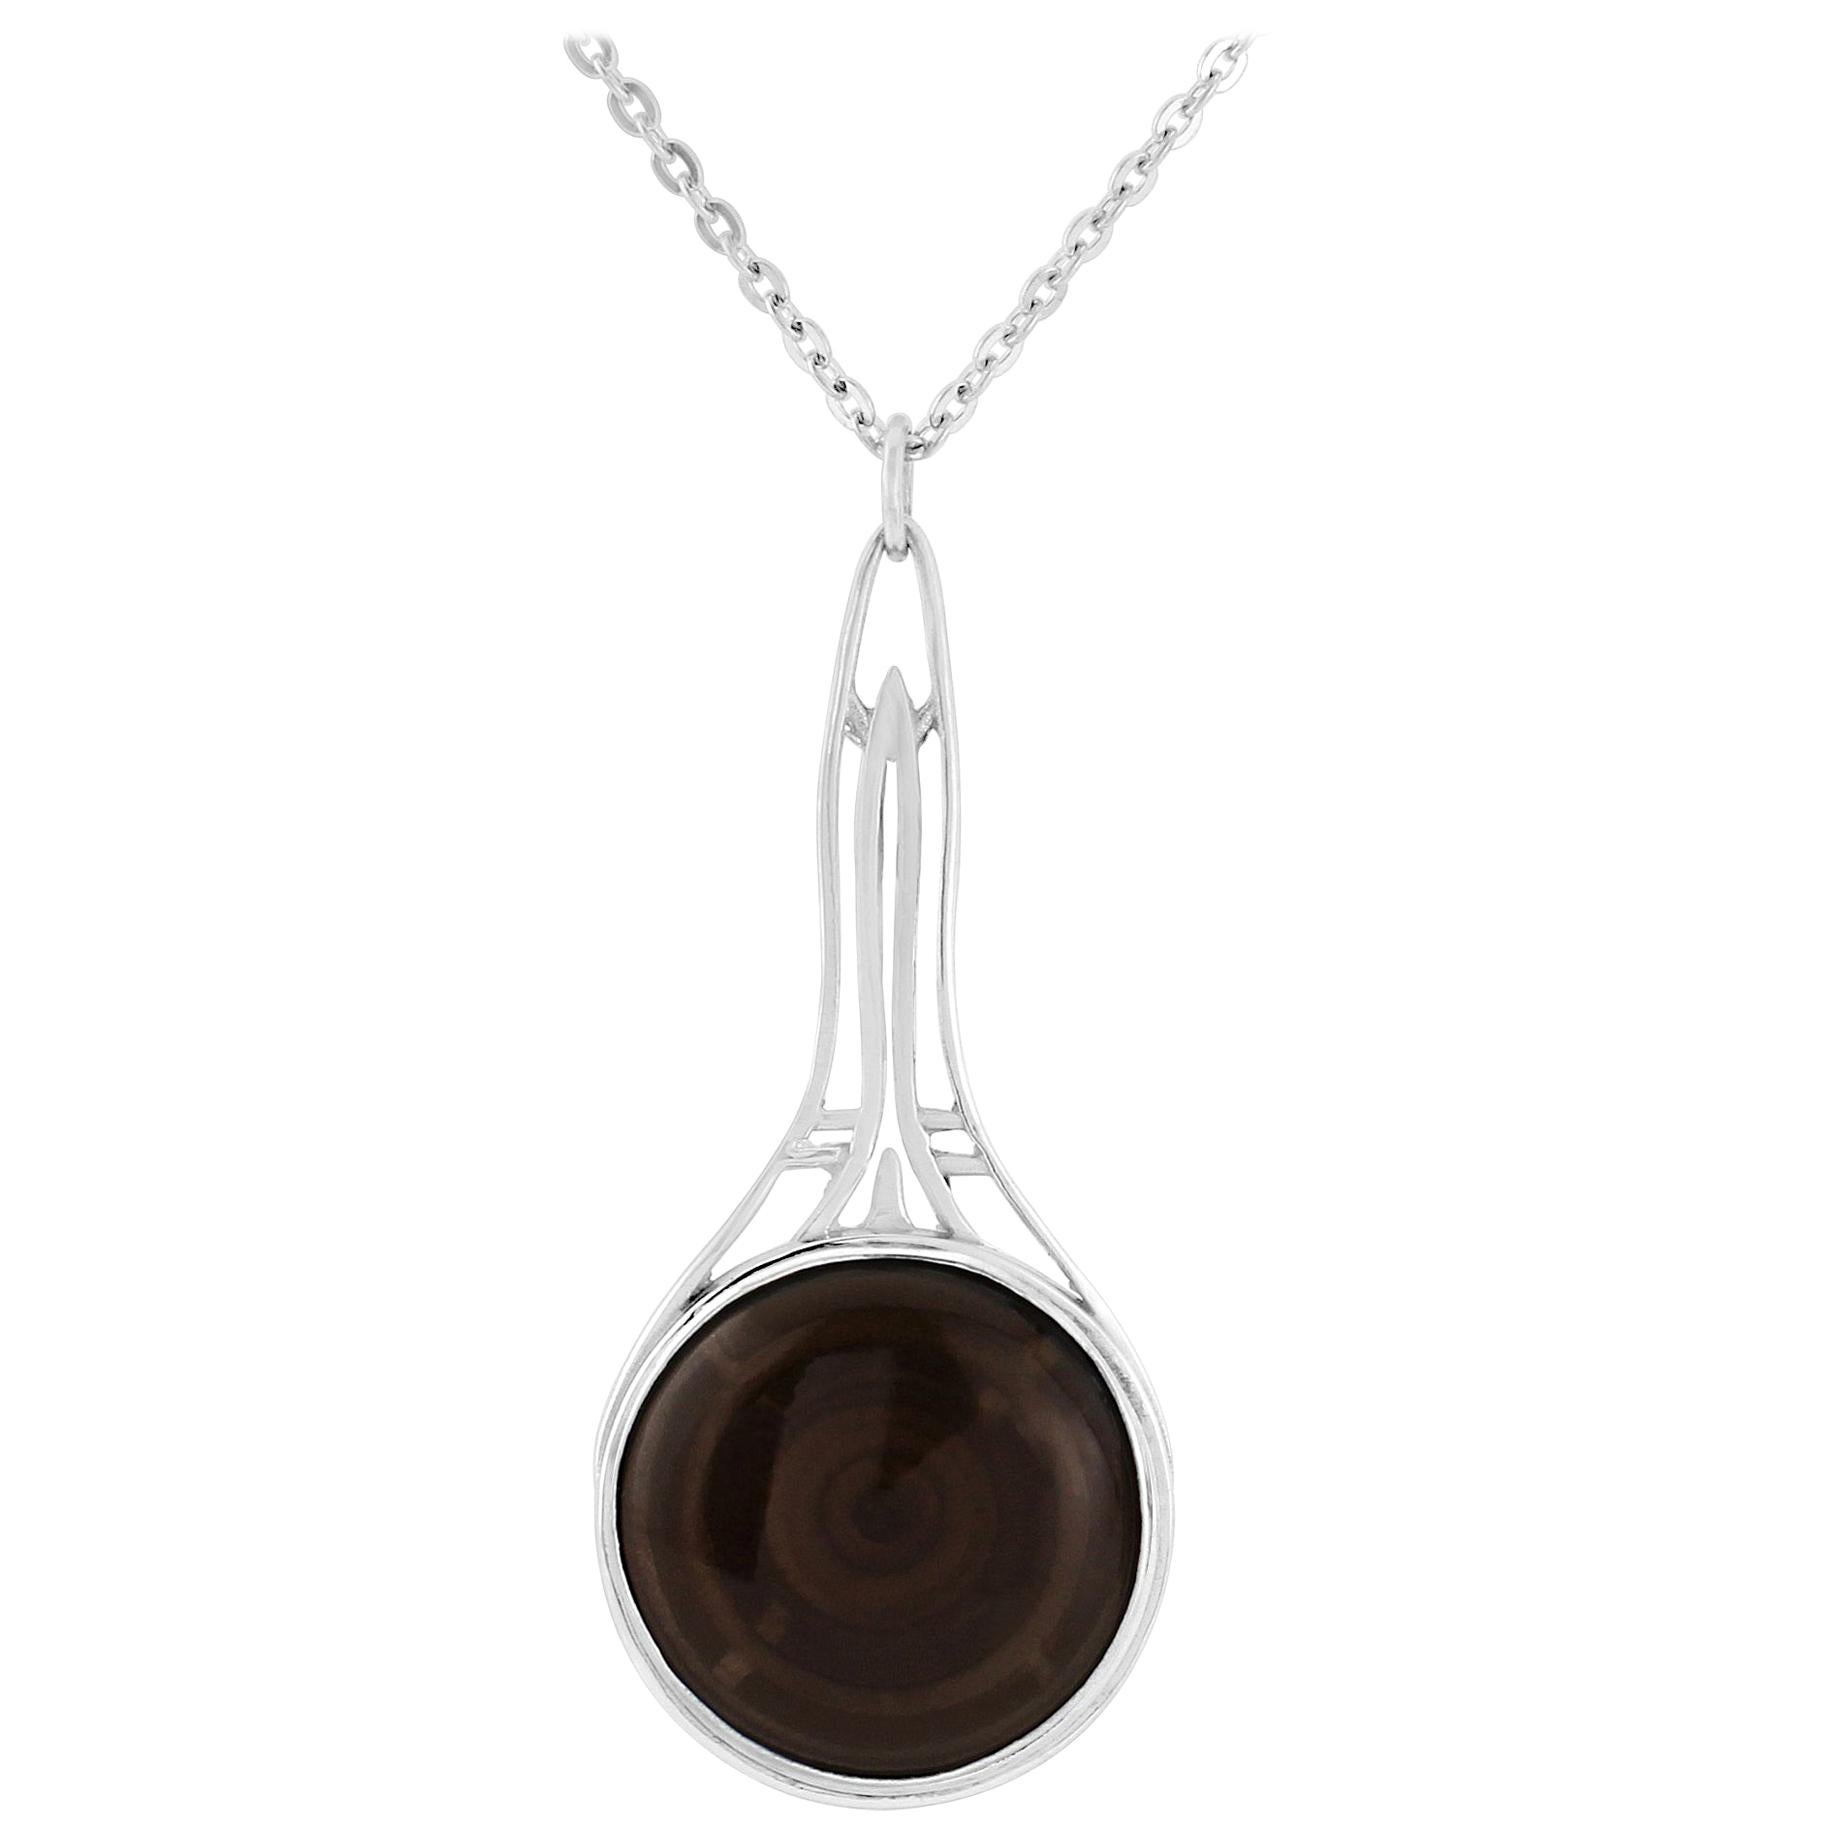 MAIKO NAGAYAMA Smoky Quartz and Solid Sterling Silver Necklace For Sale